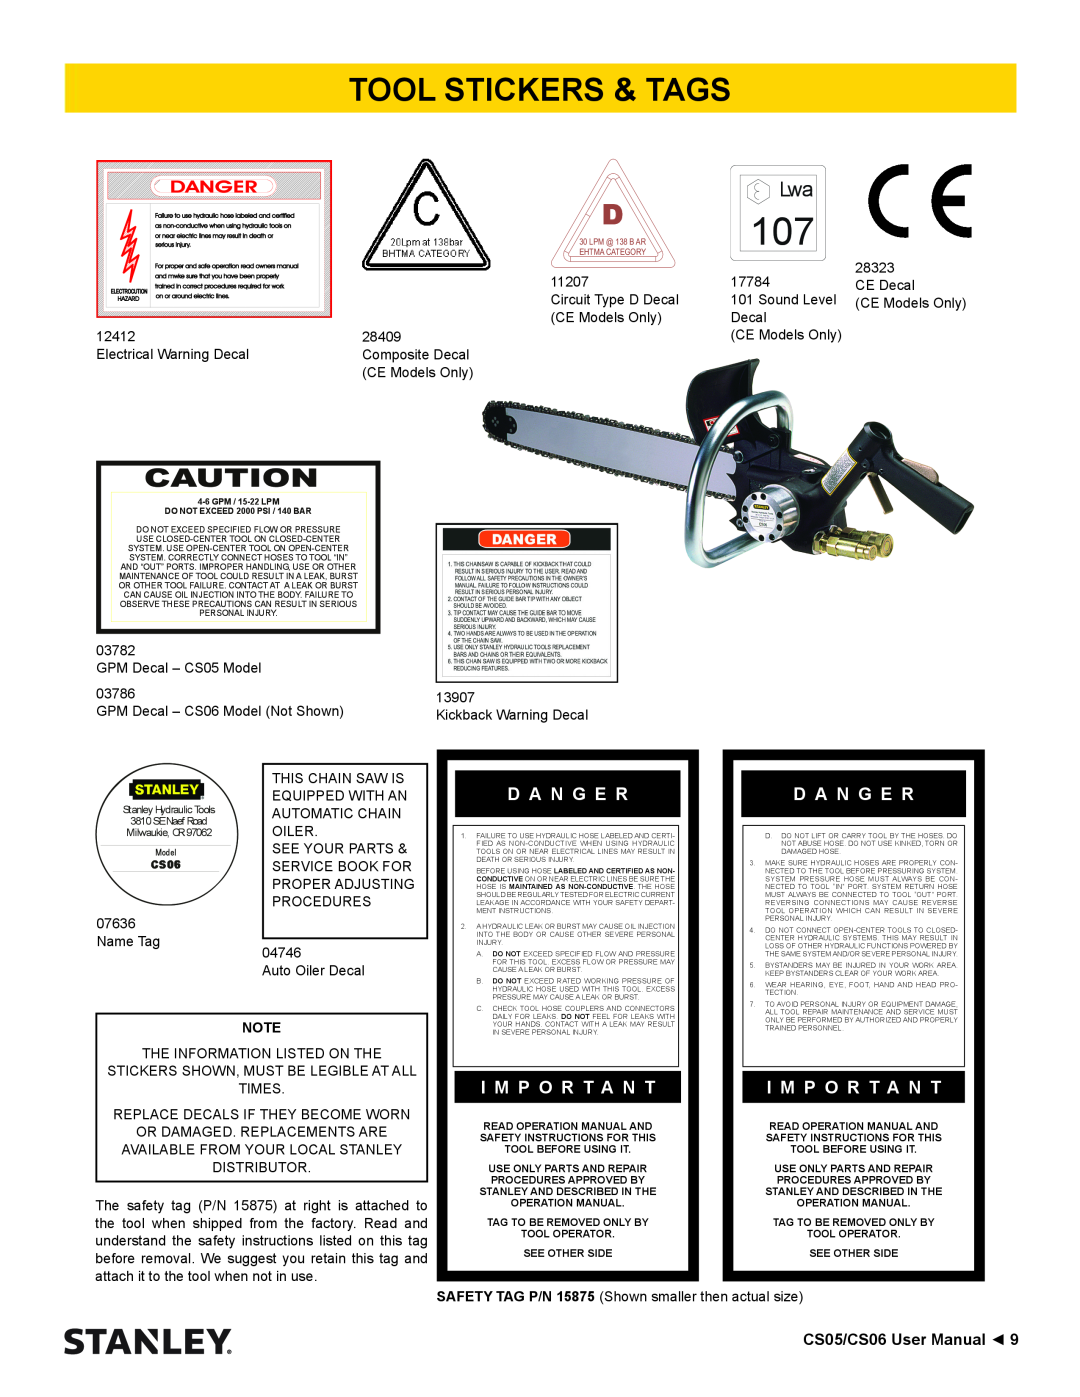 Stanley Black & Decker manual Tool Stickers & Tags, Danger, D A N G E R, I M P O R T A N T, CS05/CS06 User Manual 